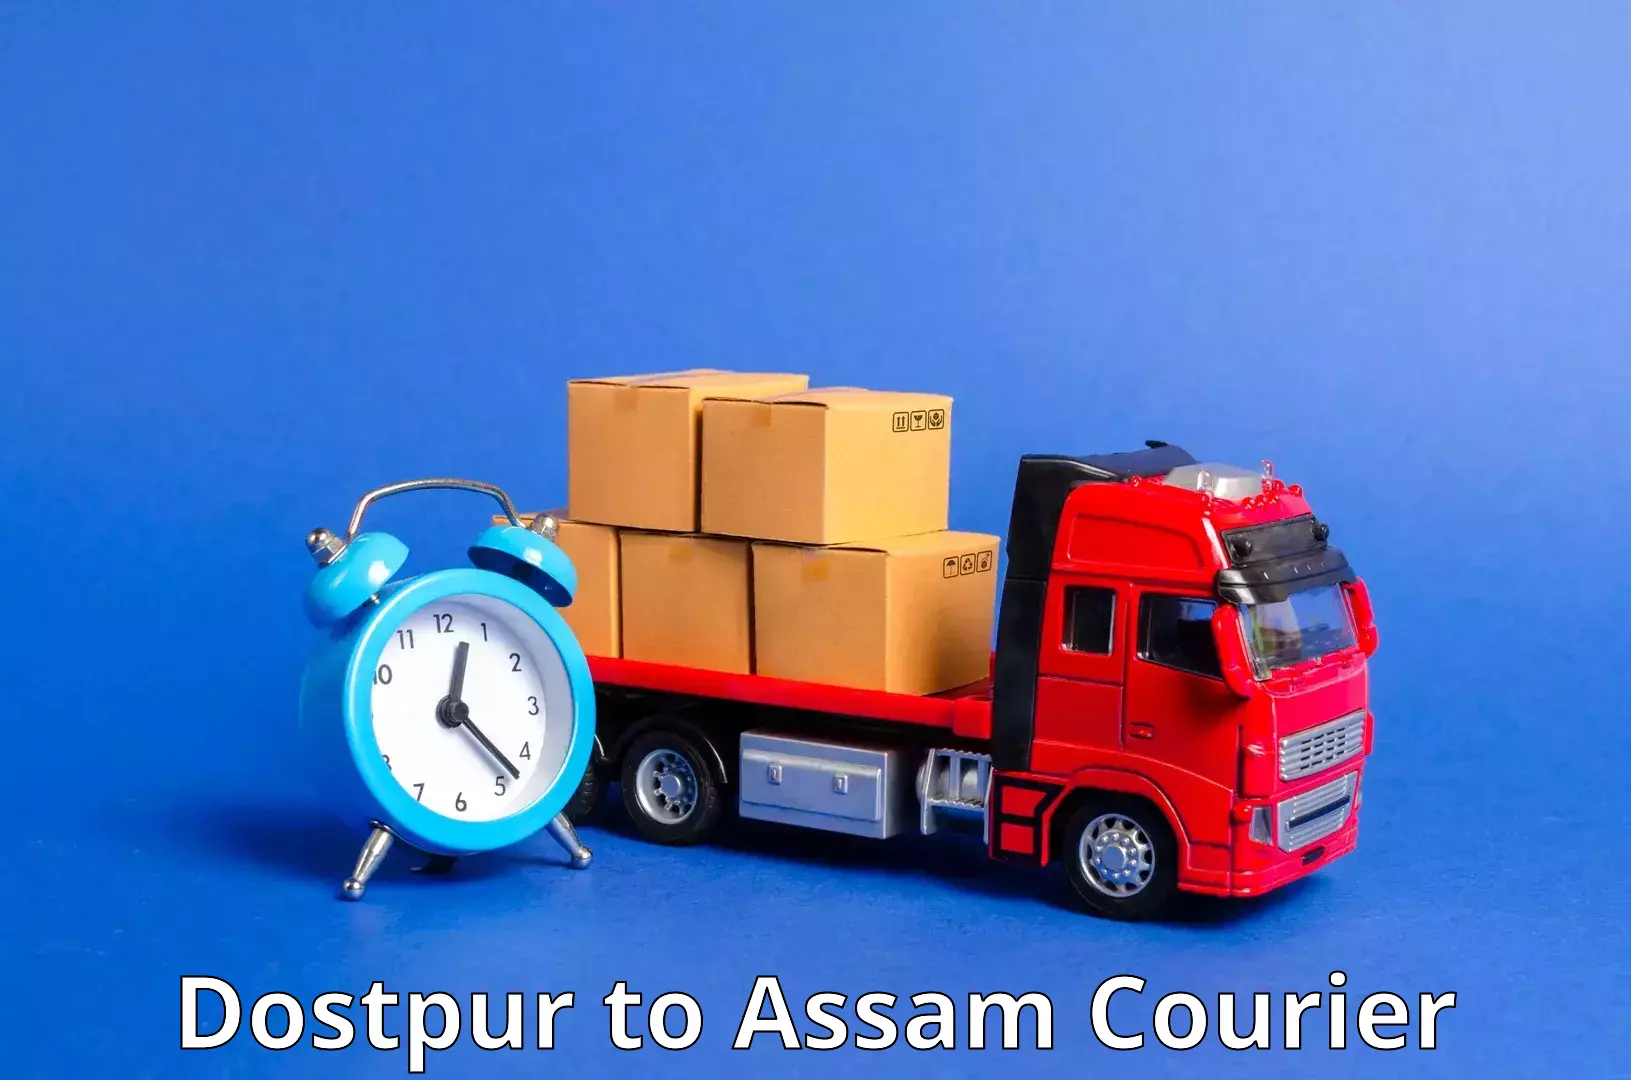 Domestic courier Dostpur to Assam